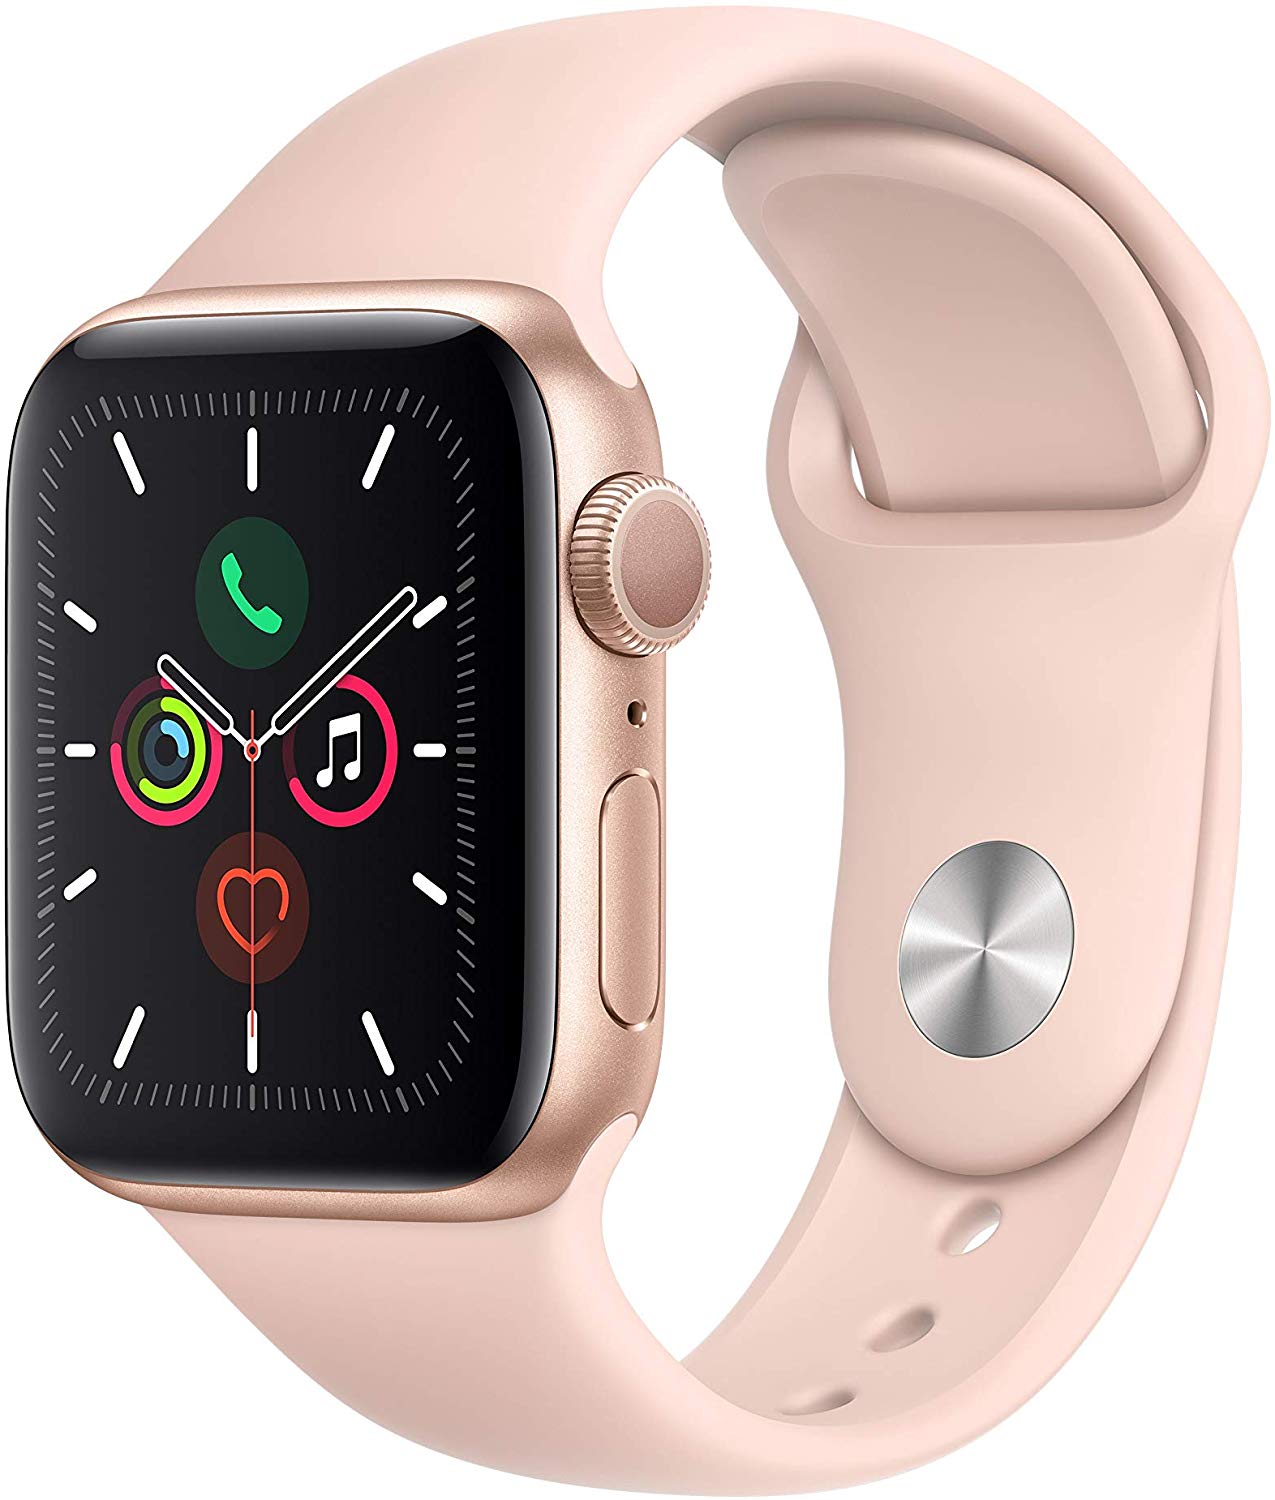 Apple Watch 5 GPS only review